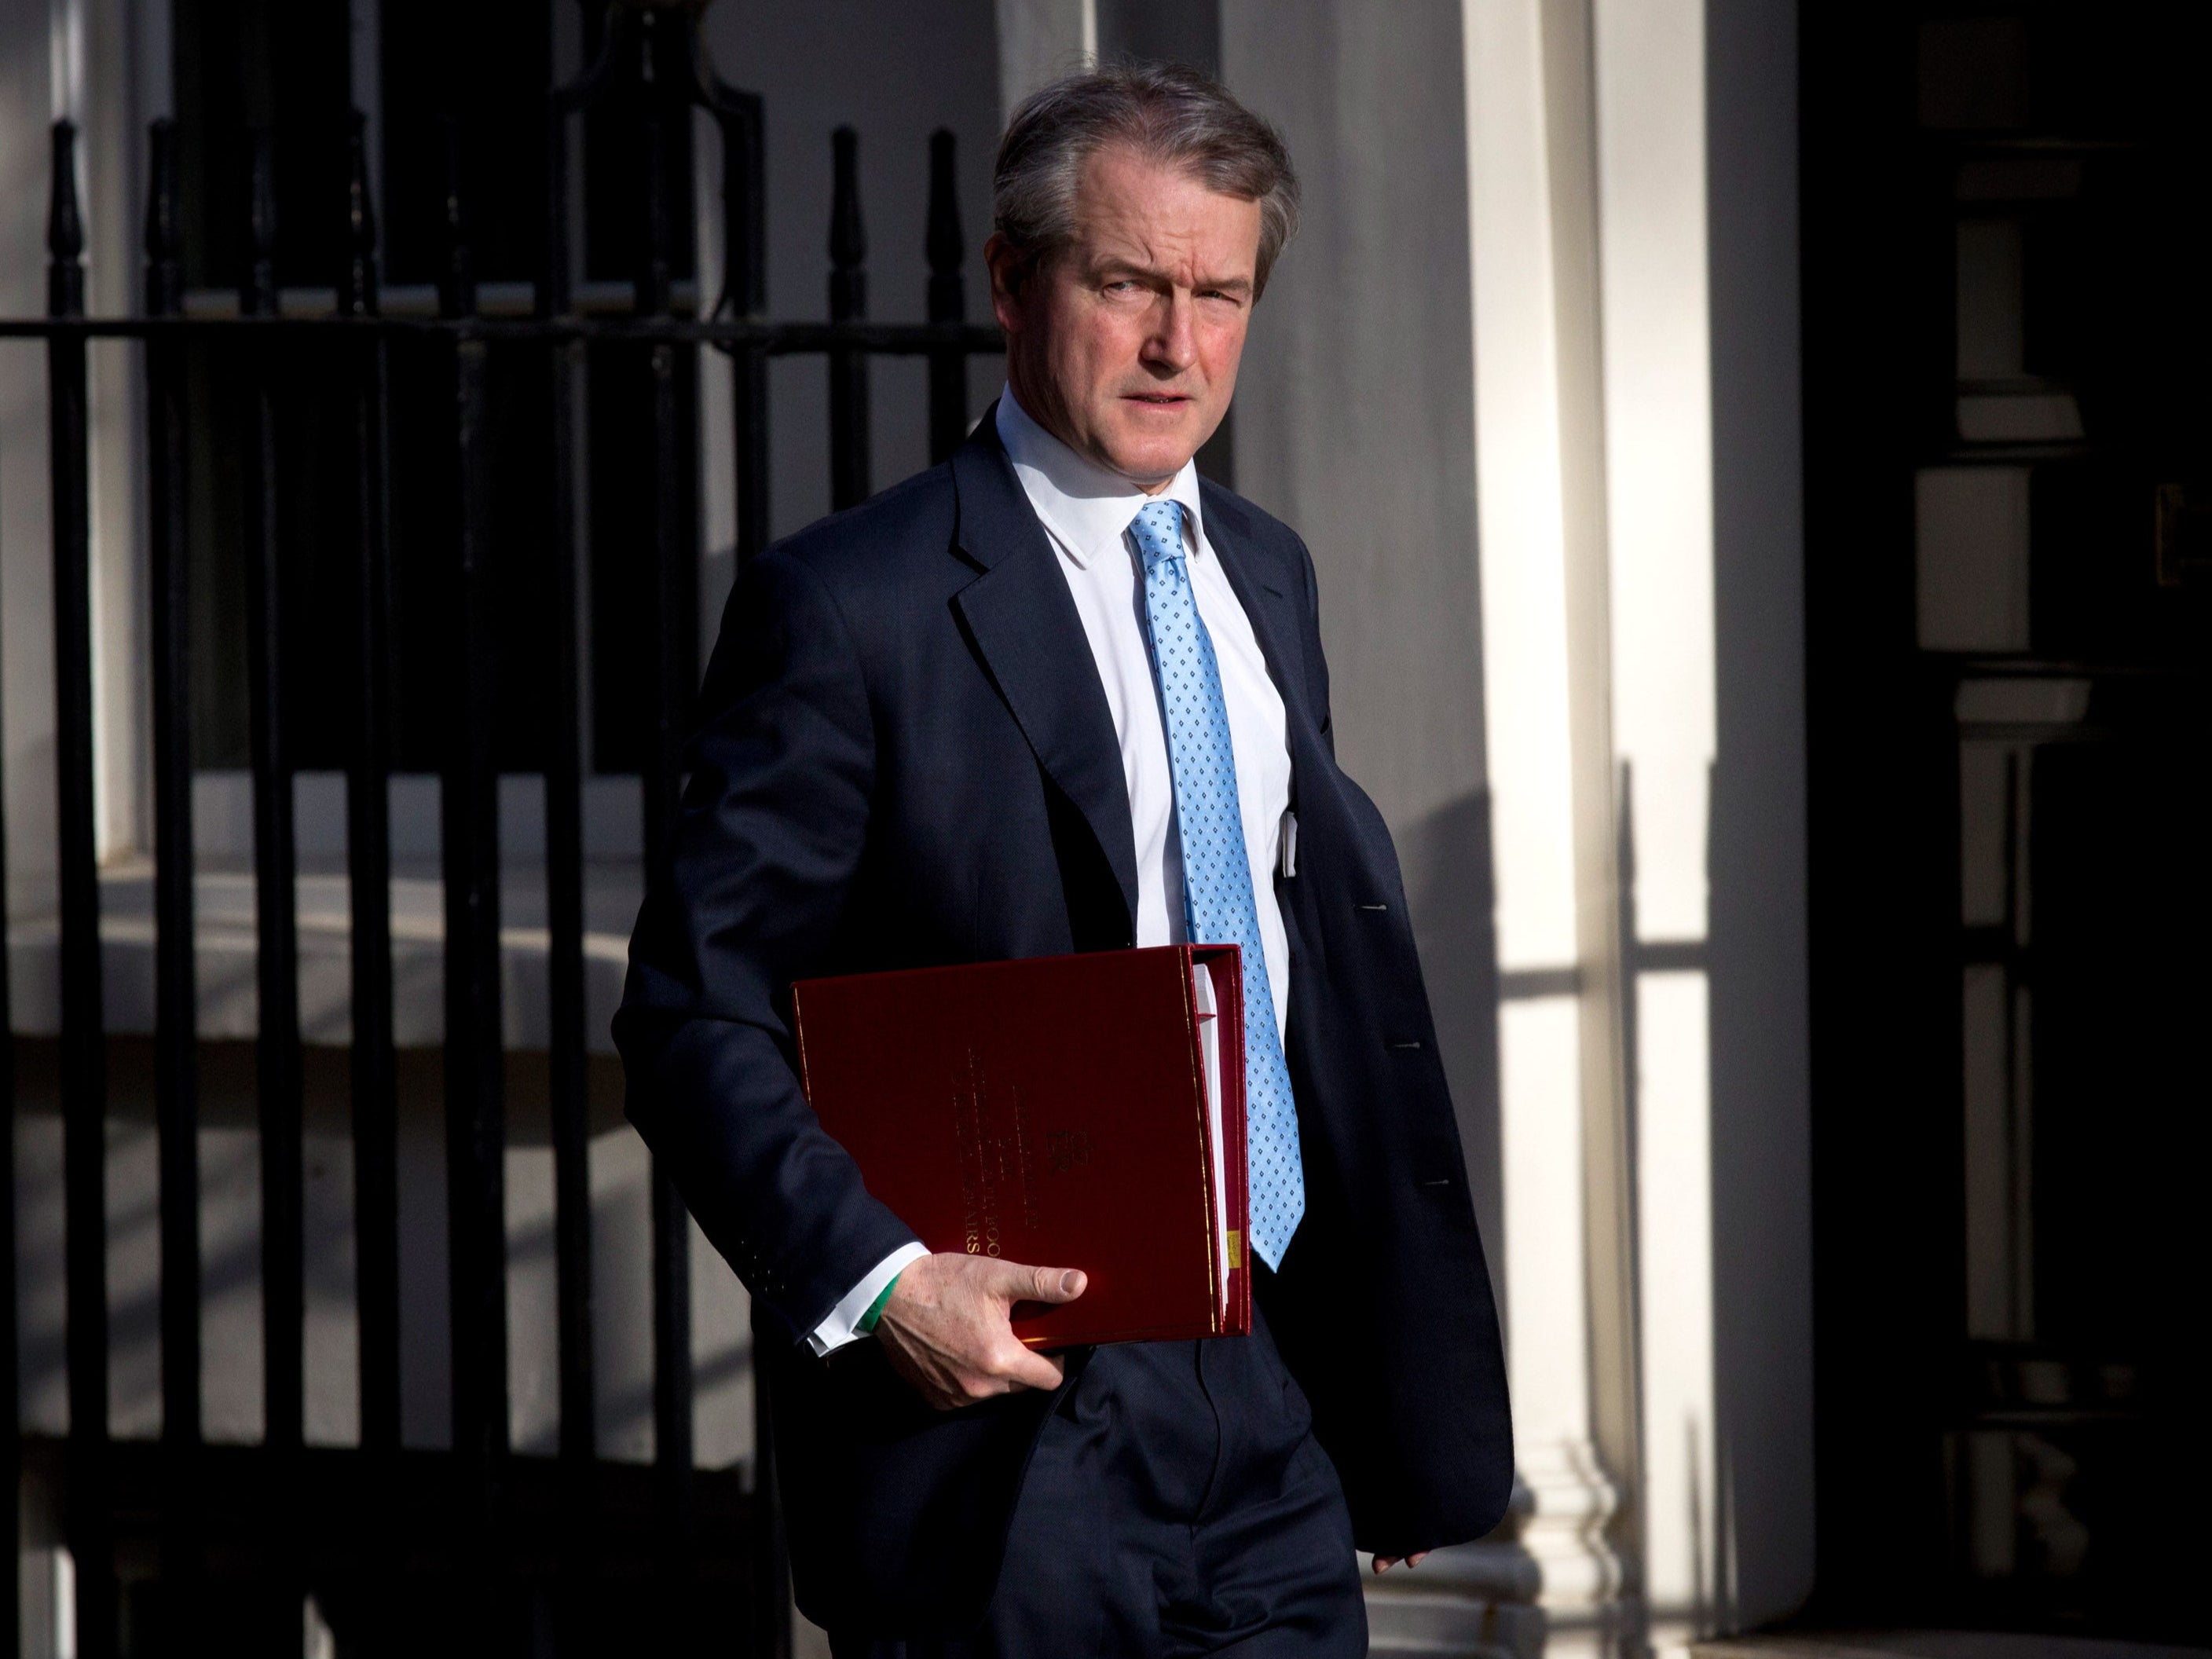 Owen Paterson resigned as MP for North Shropshire after he was found to have breached Commons rules on ‘paid advocacy’